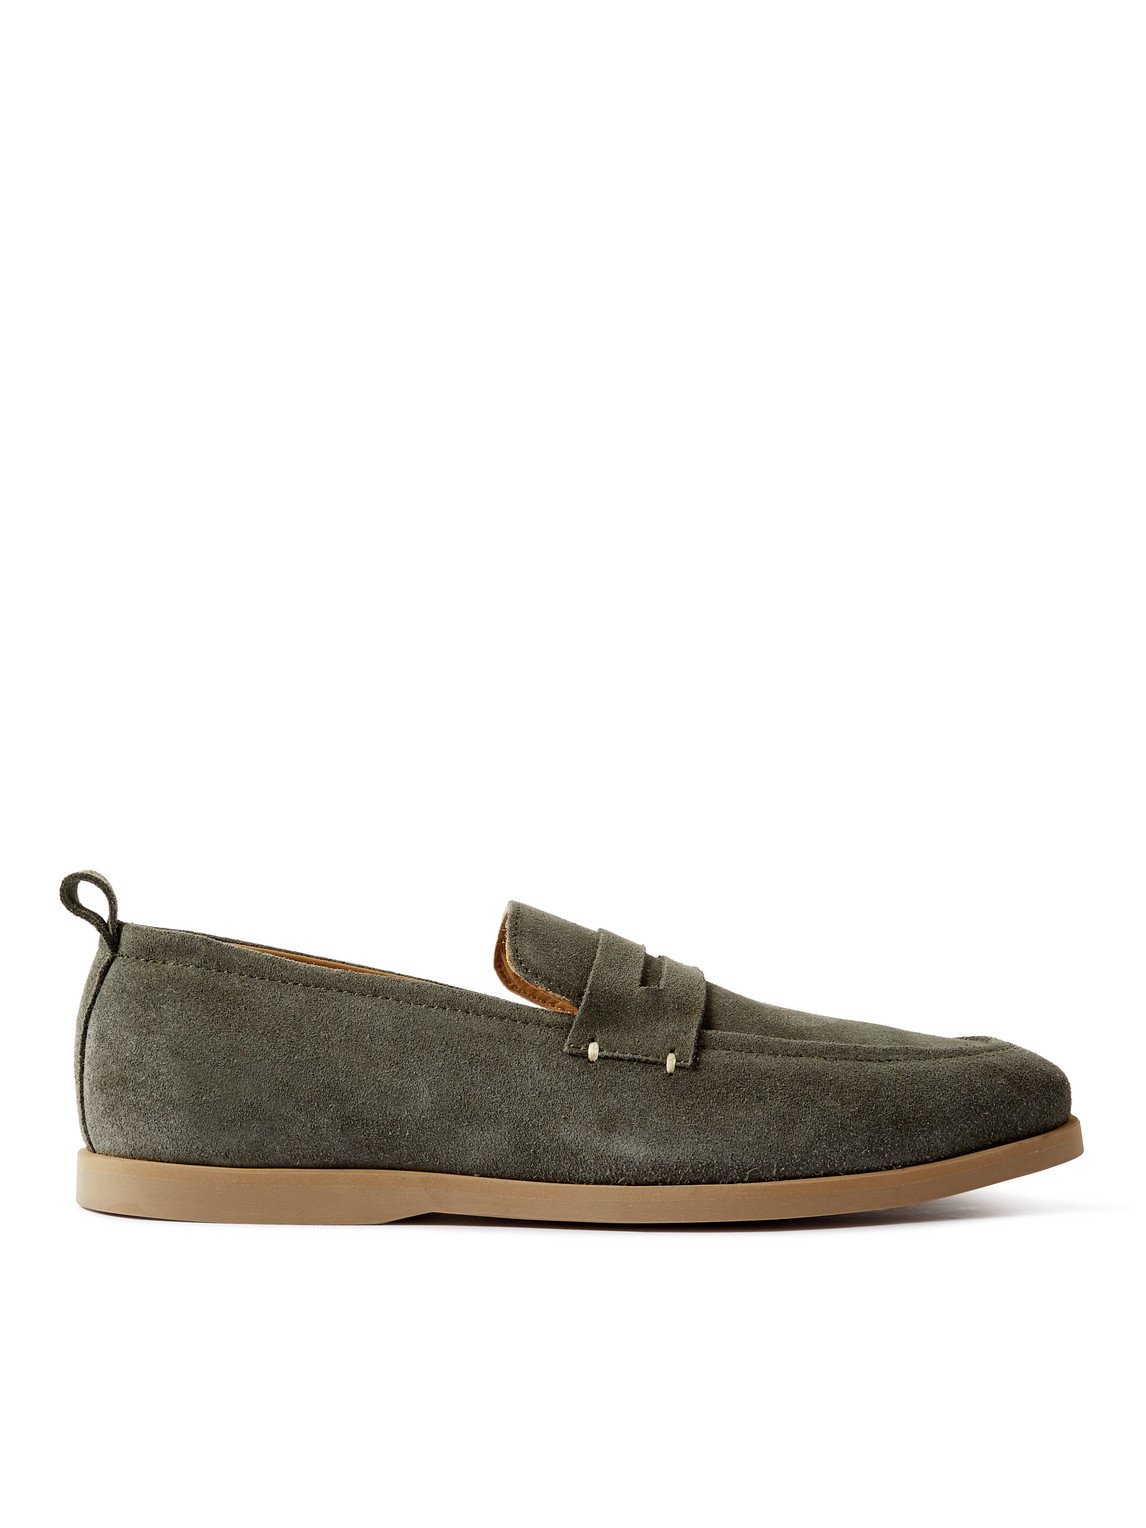 Mr P. Regenerated Suede By Evolo® Penny Loafers In Green